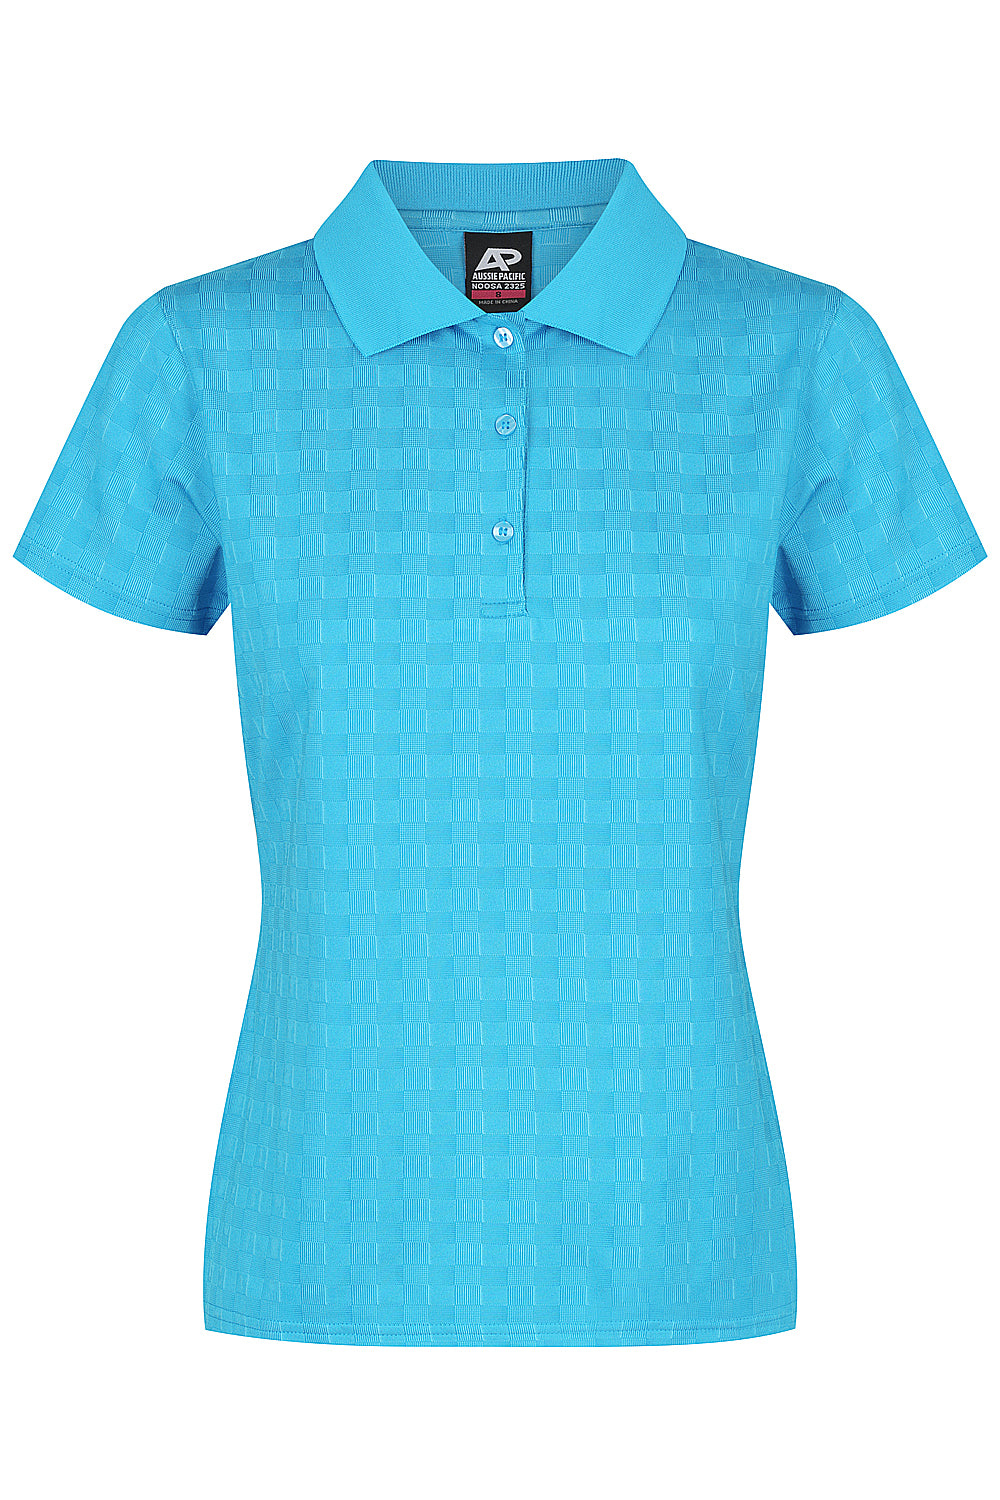 NOOSA LADY POLOS - 2325-Aussie Pacific-7